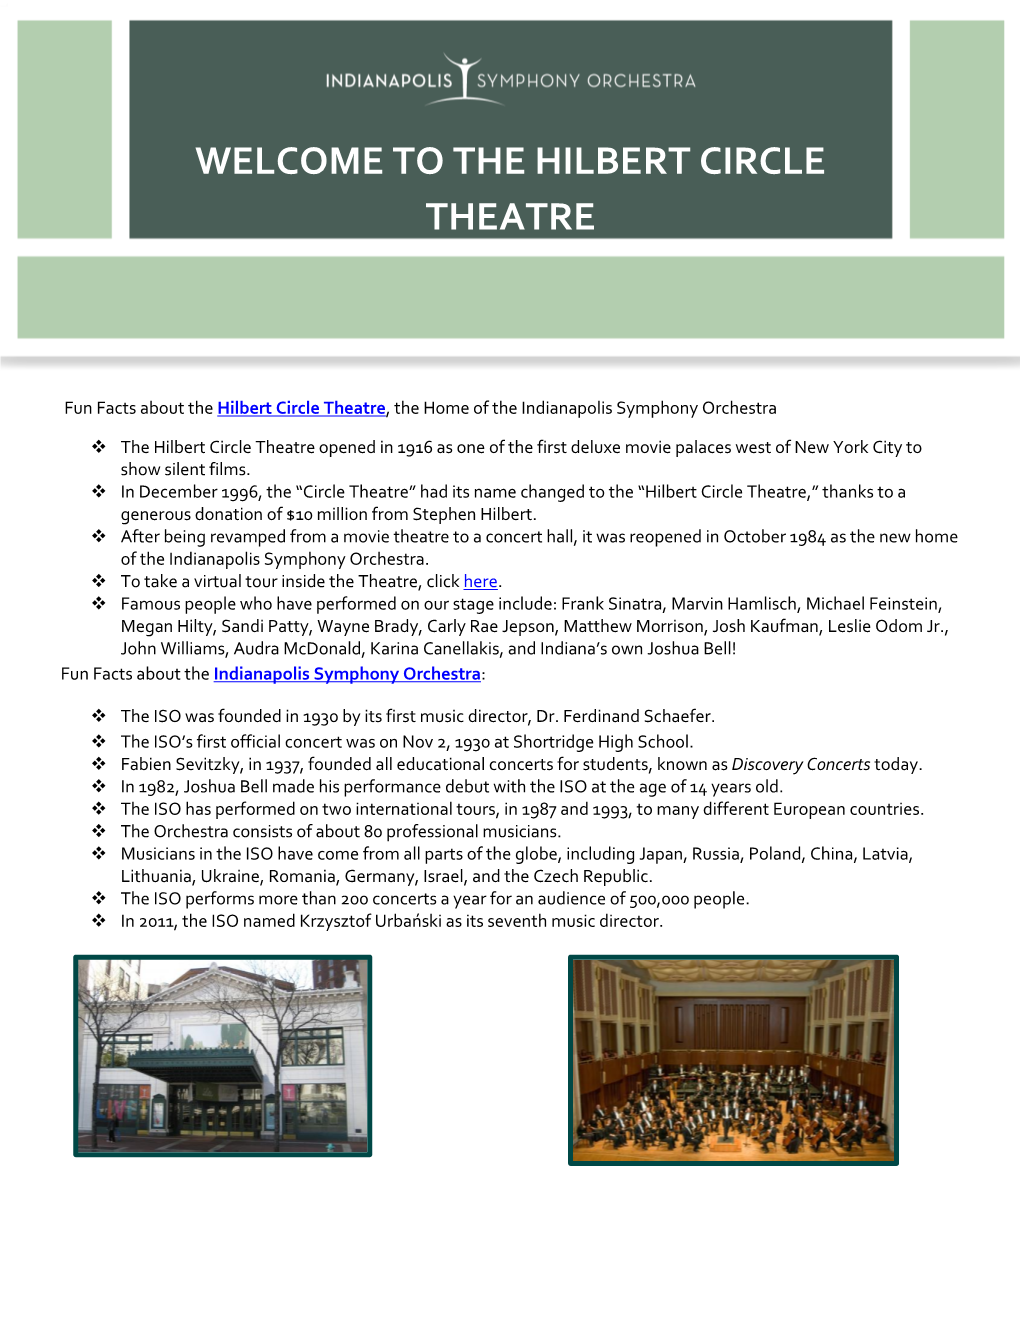 The Hilbert Circle Theatre, the Home of the Indianapolis Symphony Orchestra